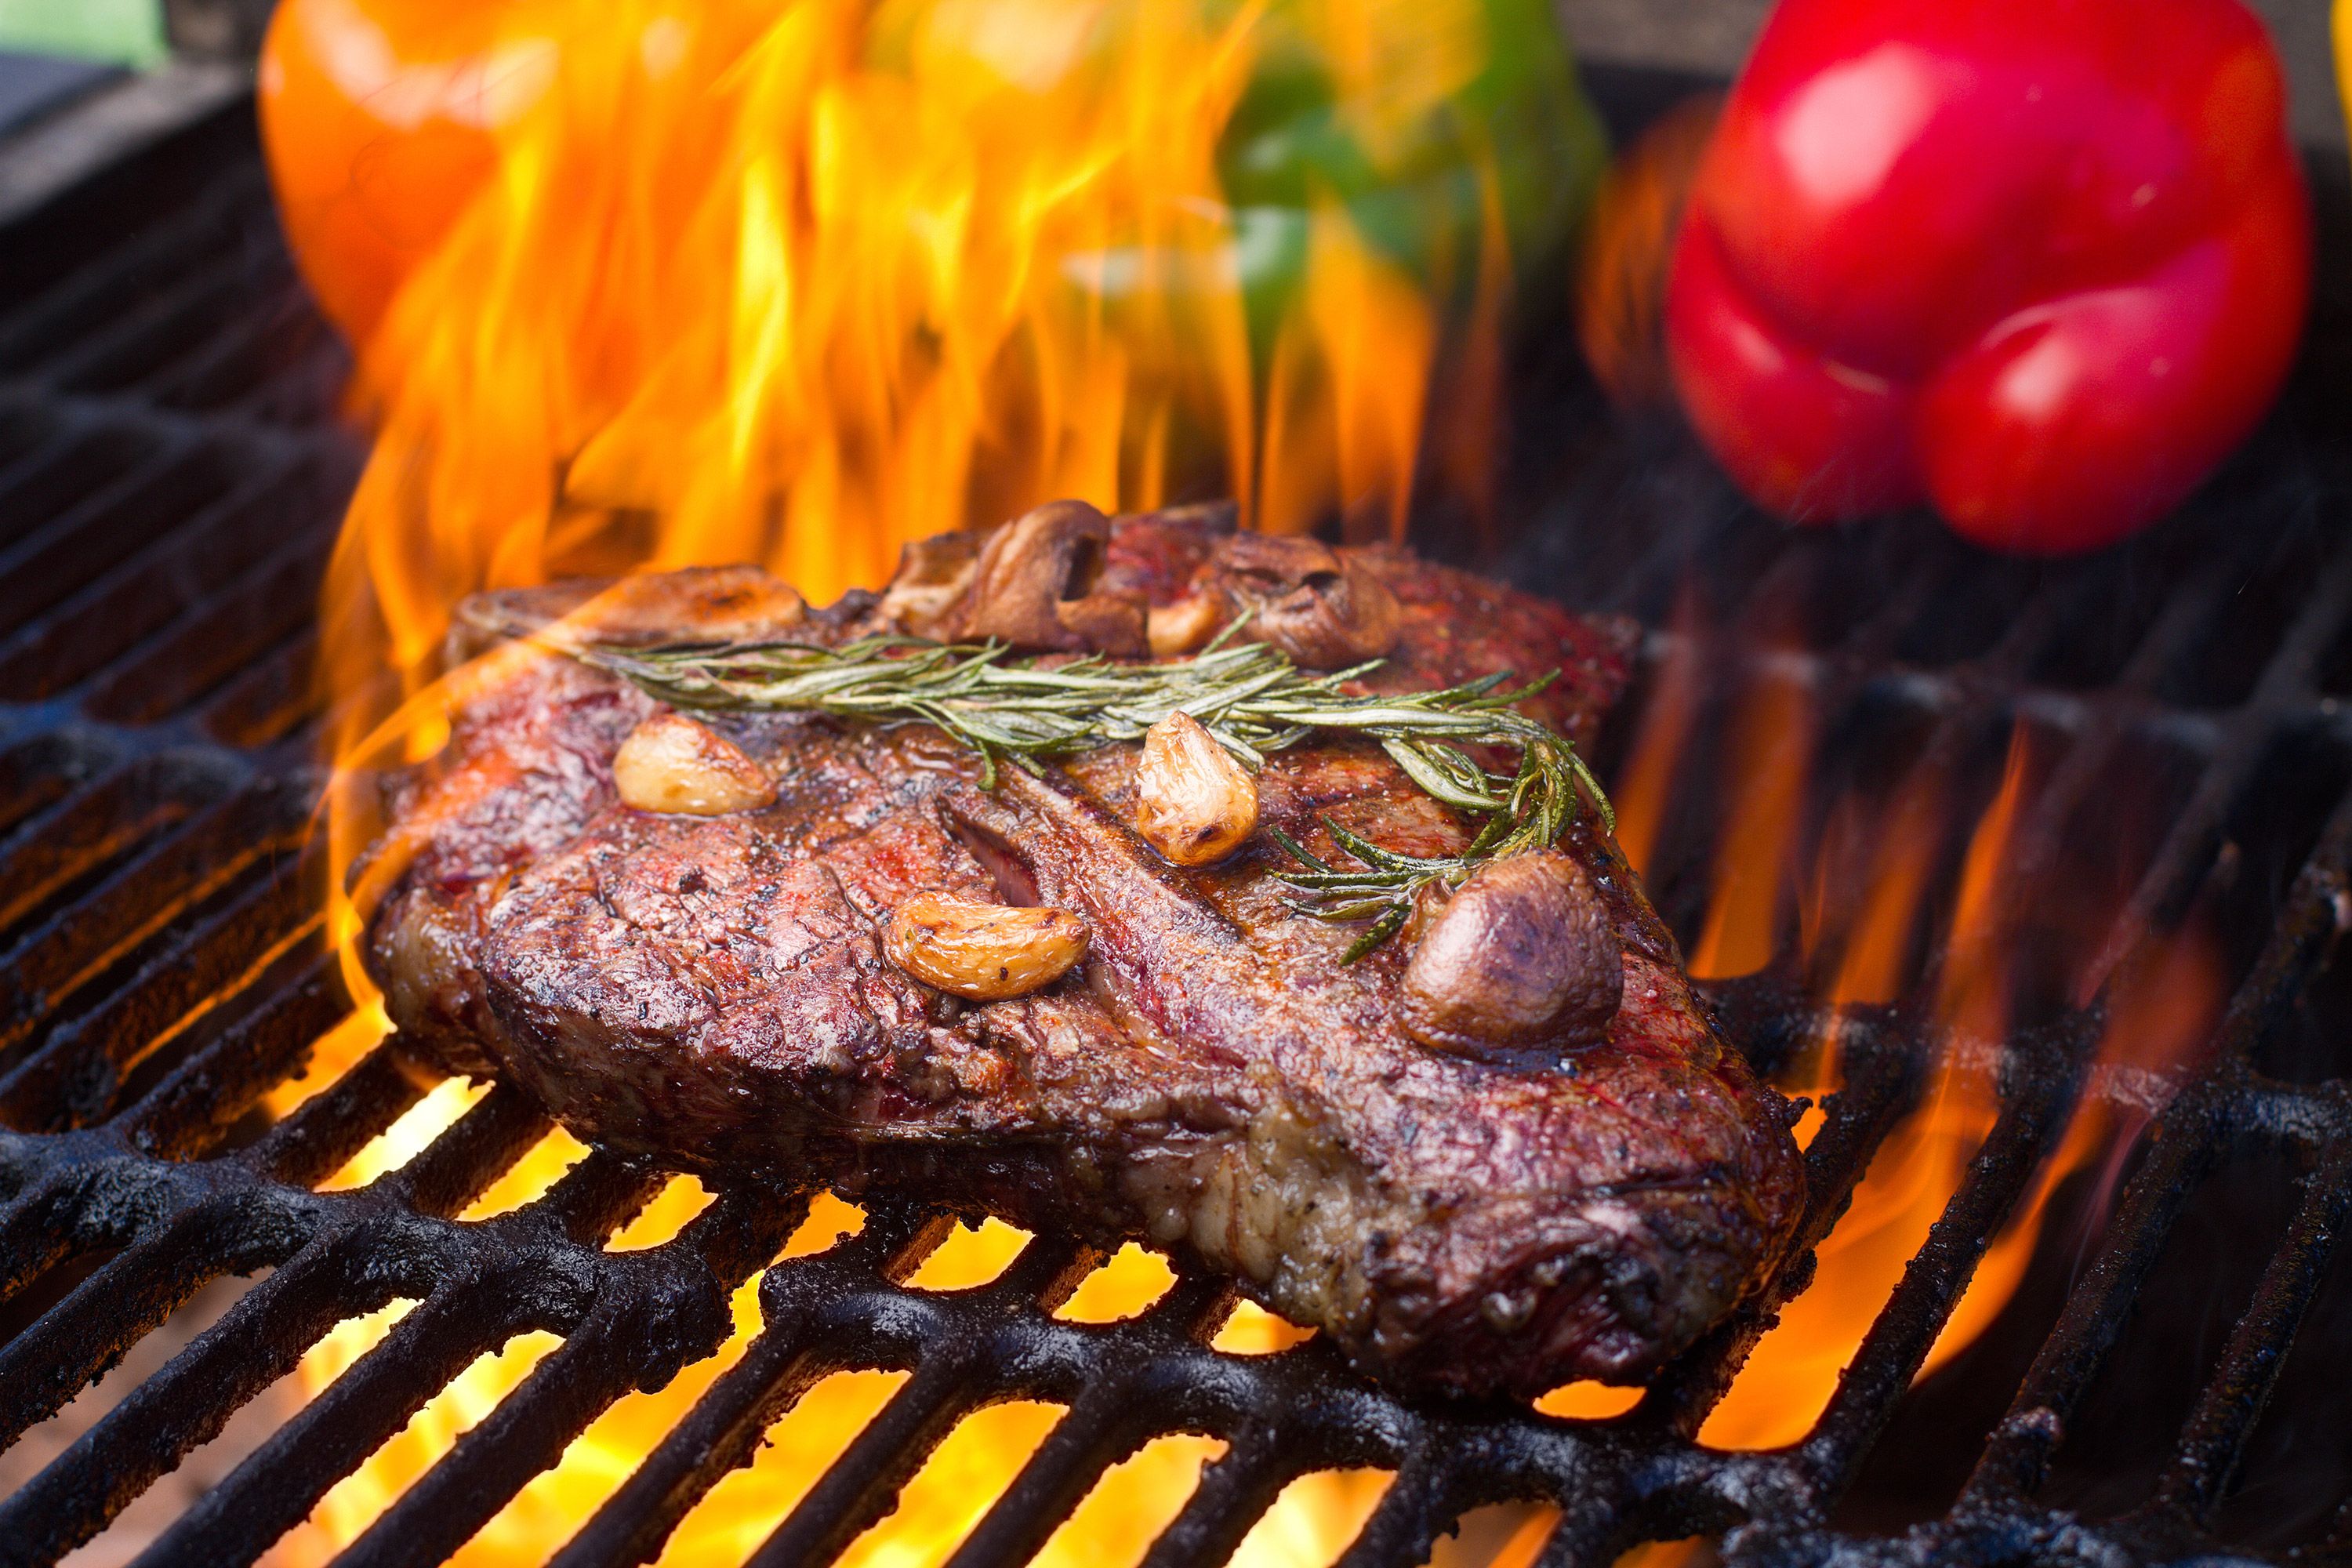 How to Cook Steak over Actual Fire